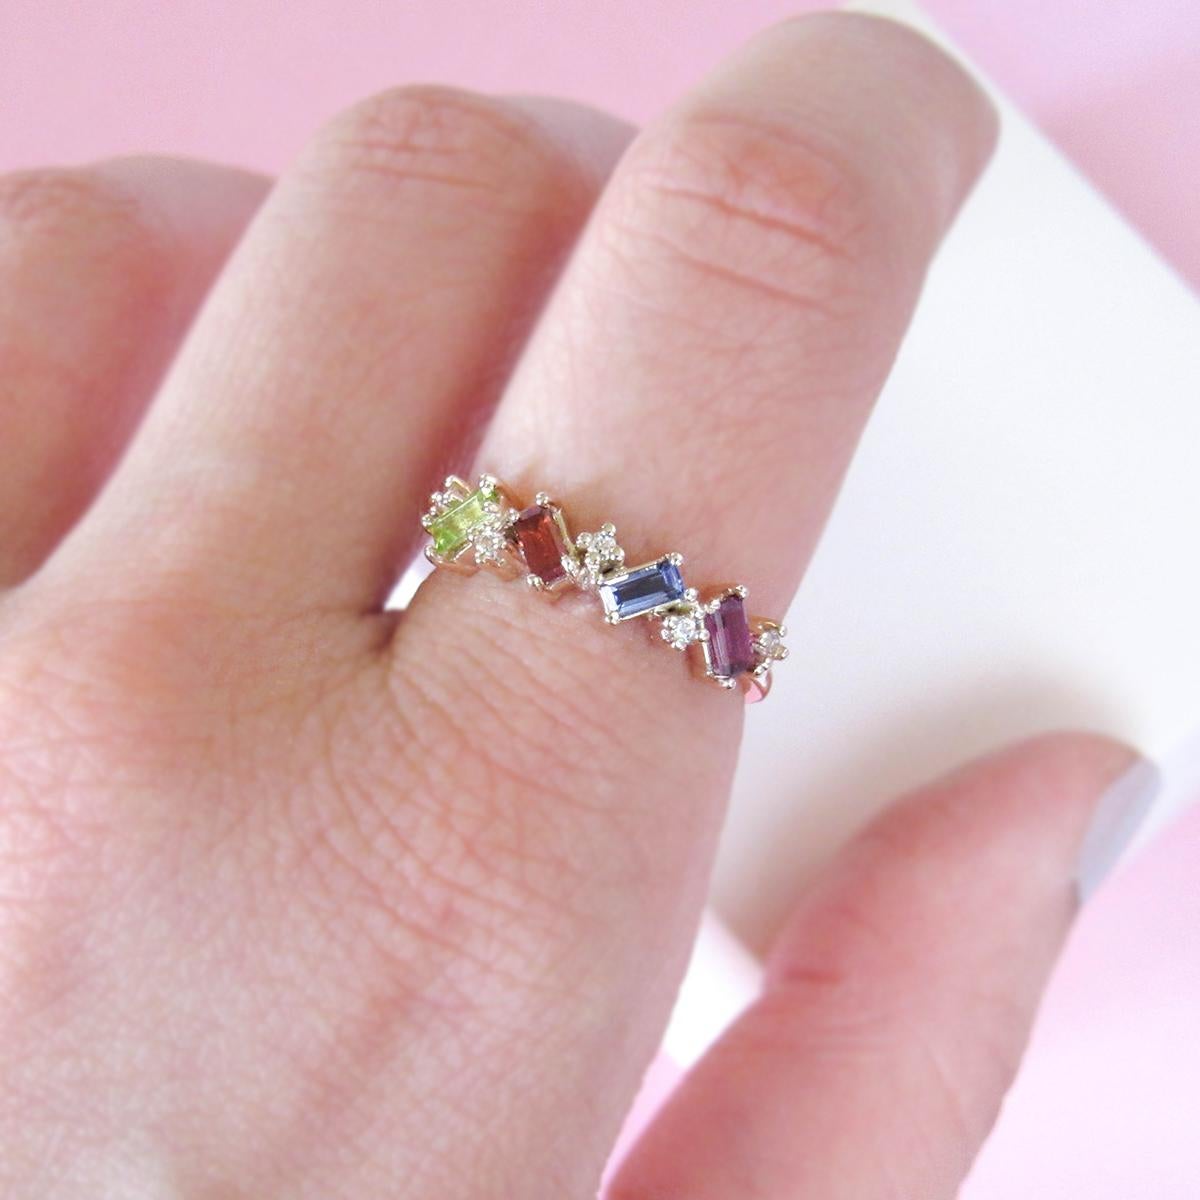 MADE TO ORDER *Please note that we take 45 business days to create your jewel before its ready to ship.  

A 14K rose gold ring, mix and matching baguette and round cut gemstones. The combination of colors is cheerful and lively. 

Gemstones: